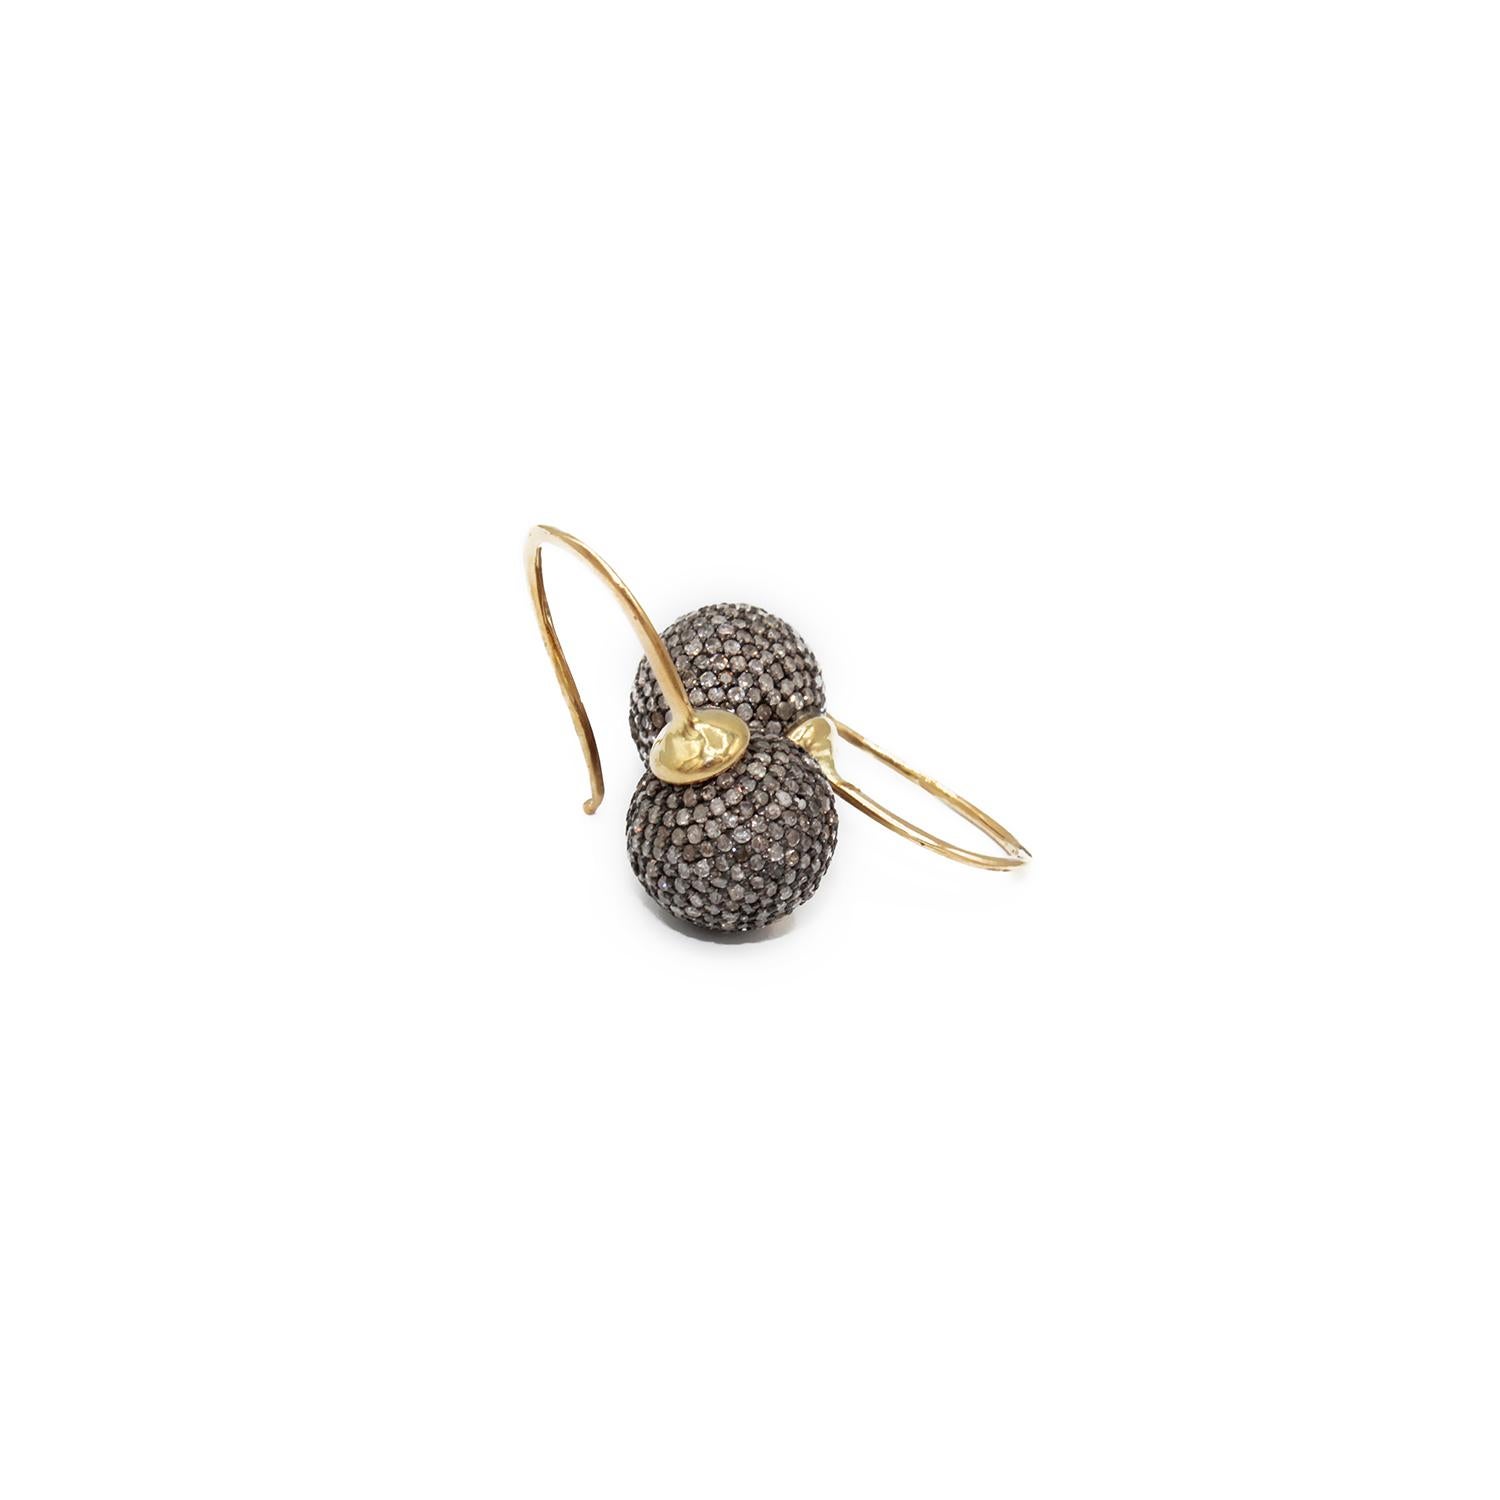 Elegant earrings in 18kt yellow gold and Brown Diamonds pave . 
Silver setting 18 mm diameter
Brown Diamonds ct. 4,70
Yellow Gold g. 2,2
Hook System

